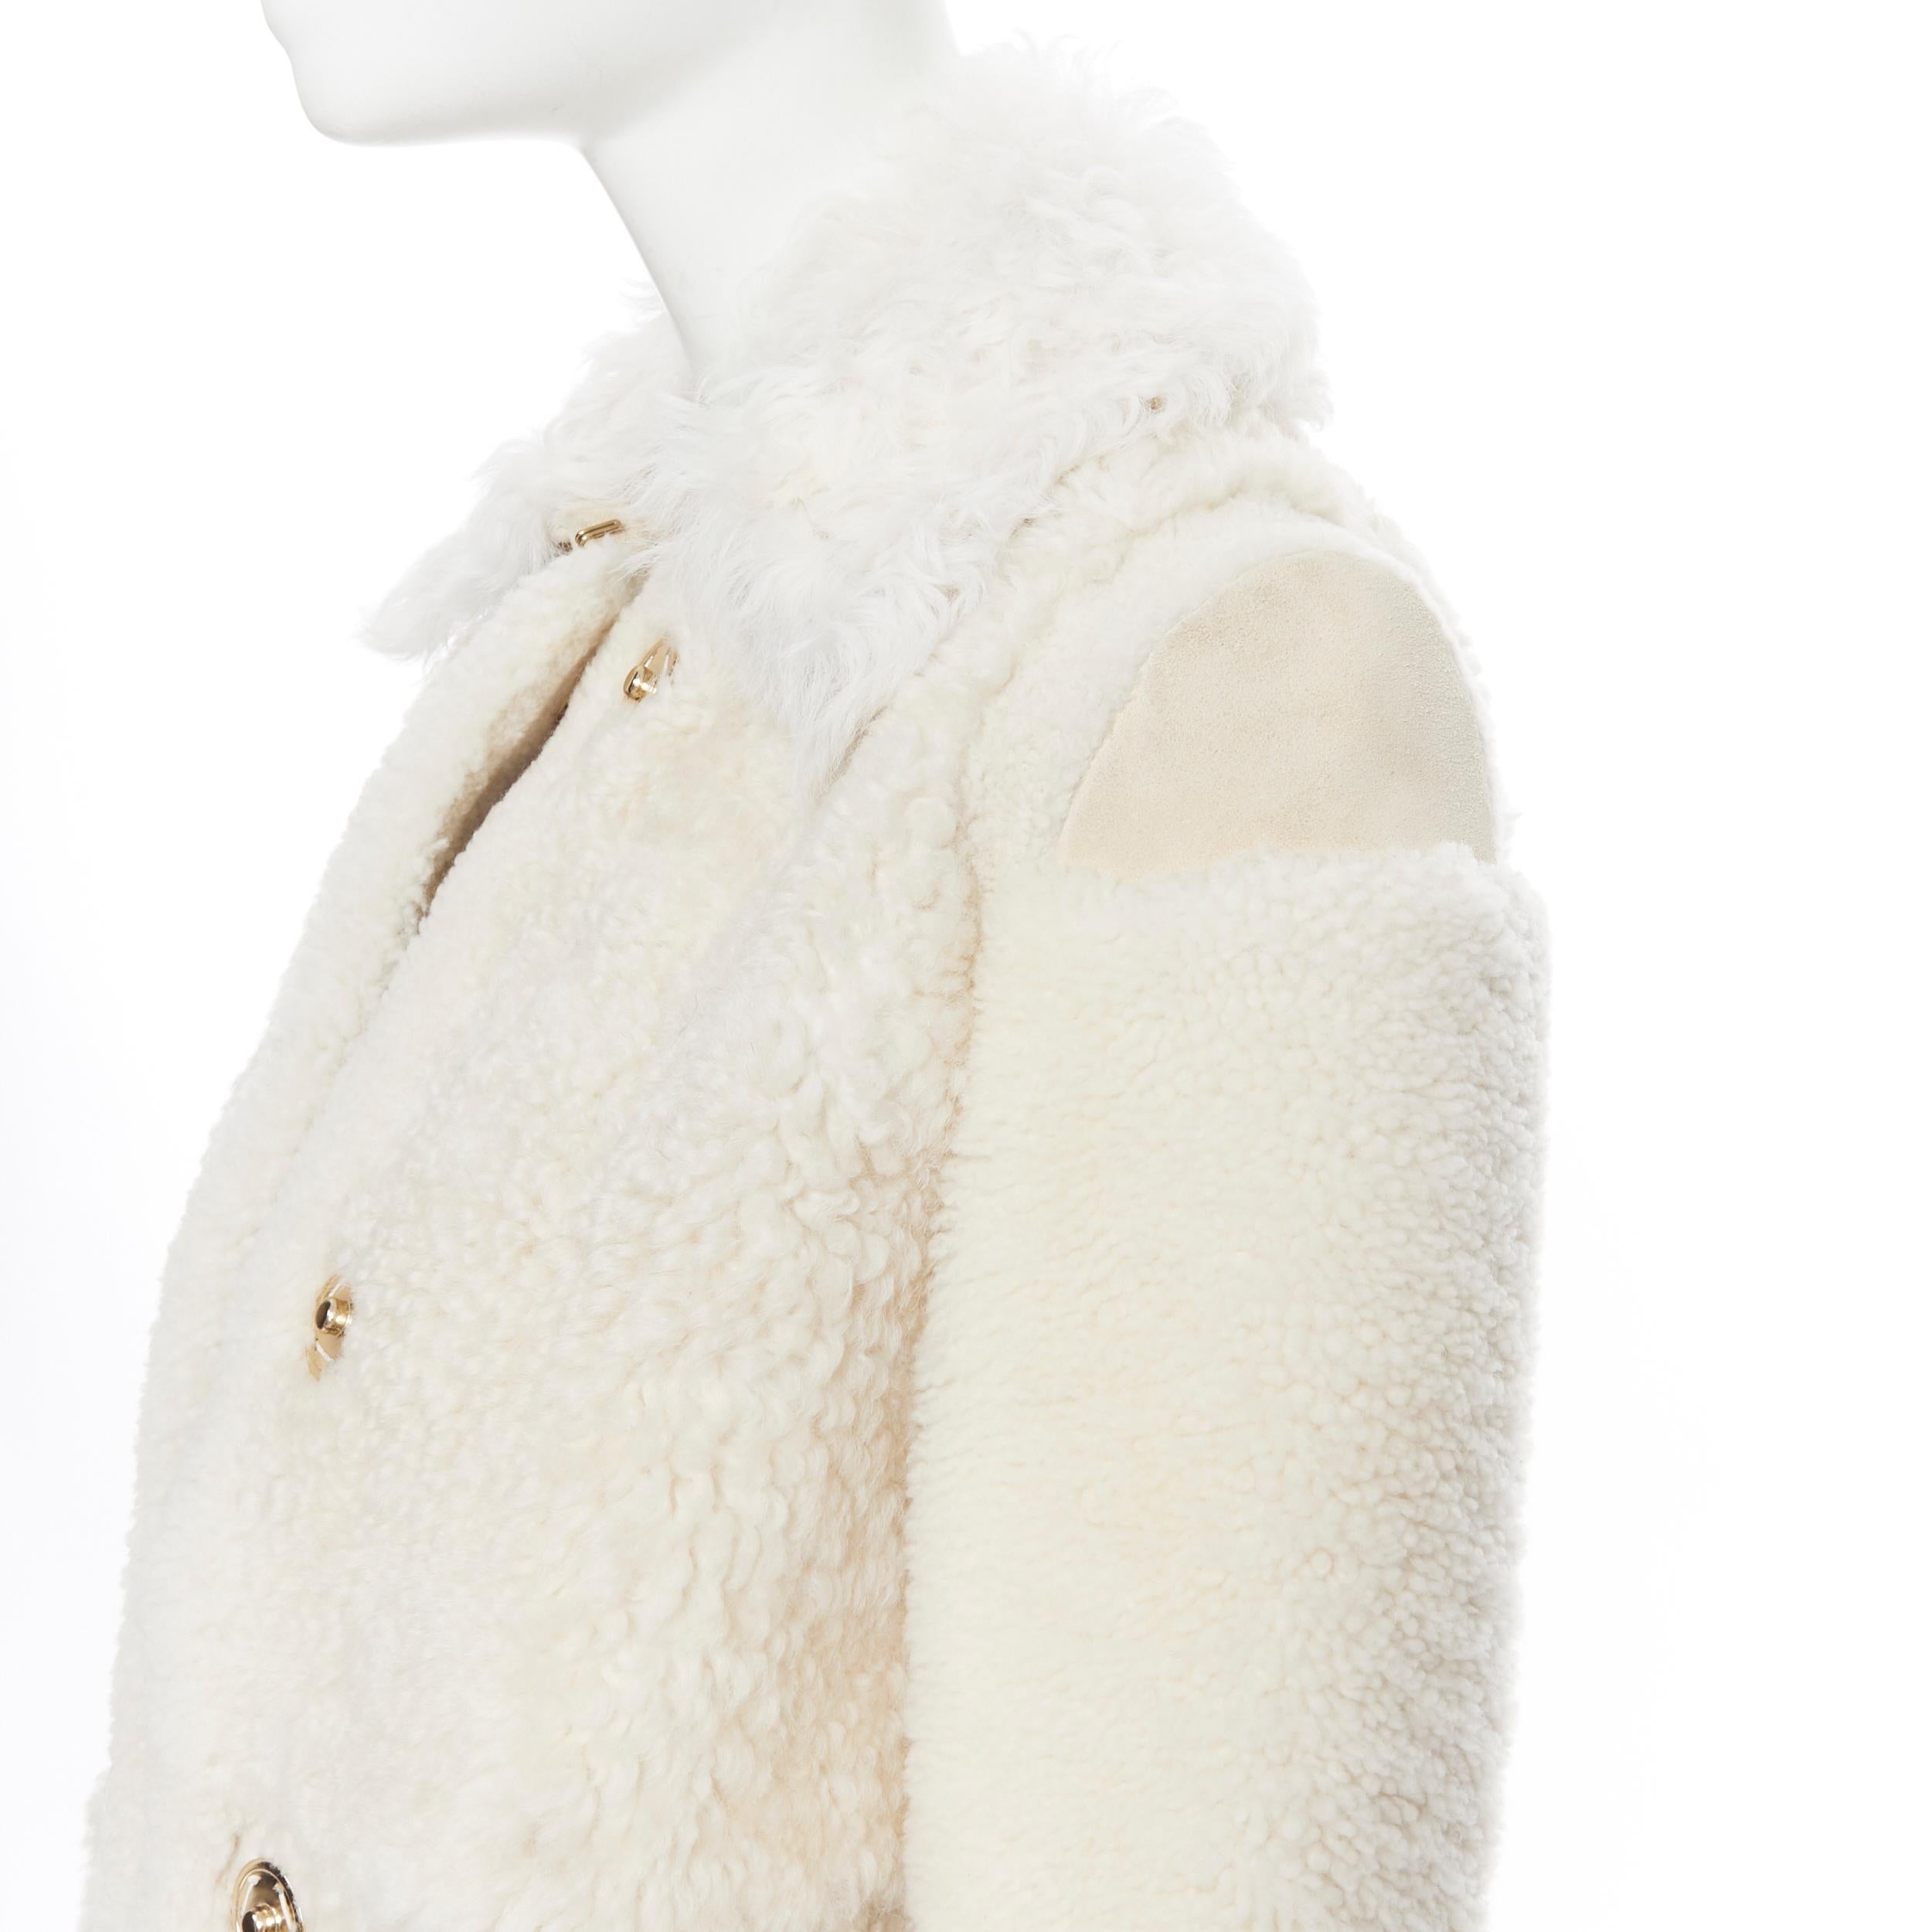 runway BURBERRY PRORSUM ivory sheep shearling shaved panel winter coat IT36 XS
Brand: Burberry
Designer: Christopher Bailey
Model Name / Style: Shearling coat
Material: Fur
Color: Beige
Pattern: Solid
Closure: Snap
Extra Detail: 100% genuine sheep